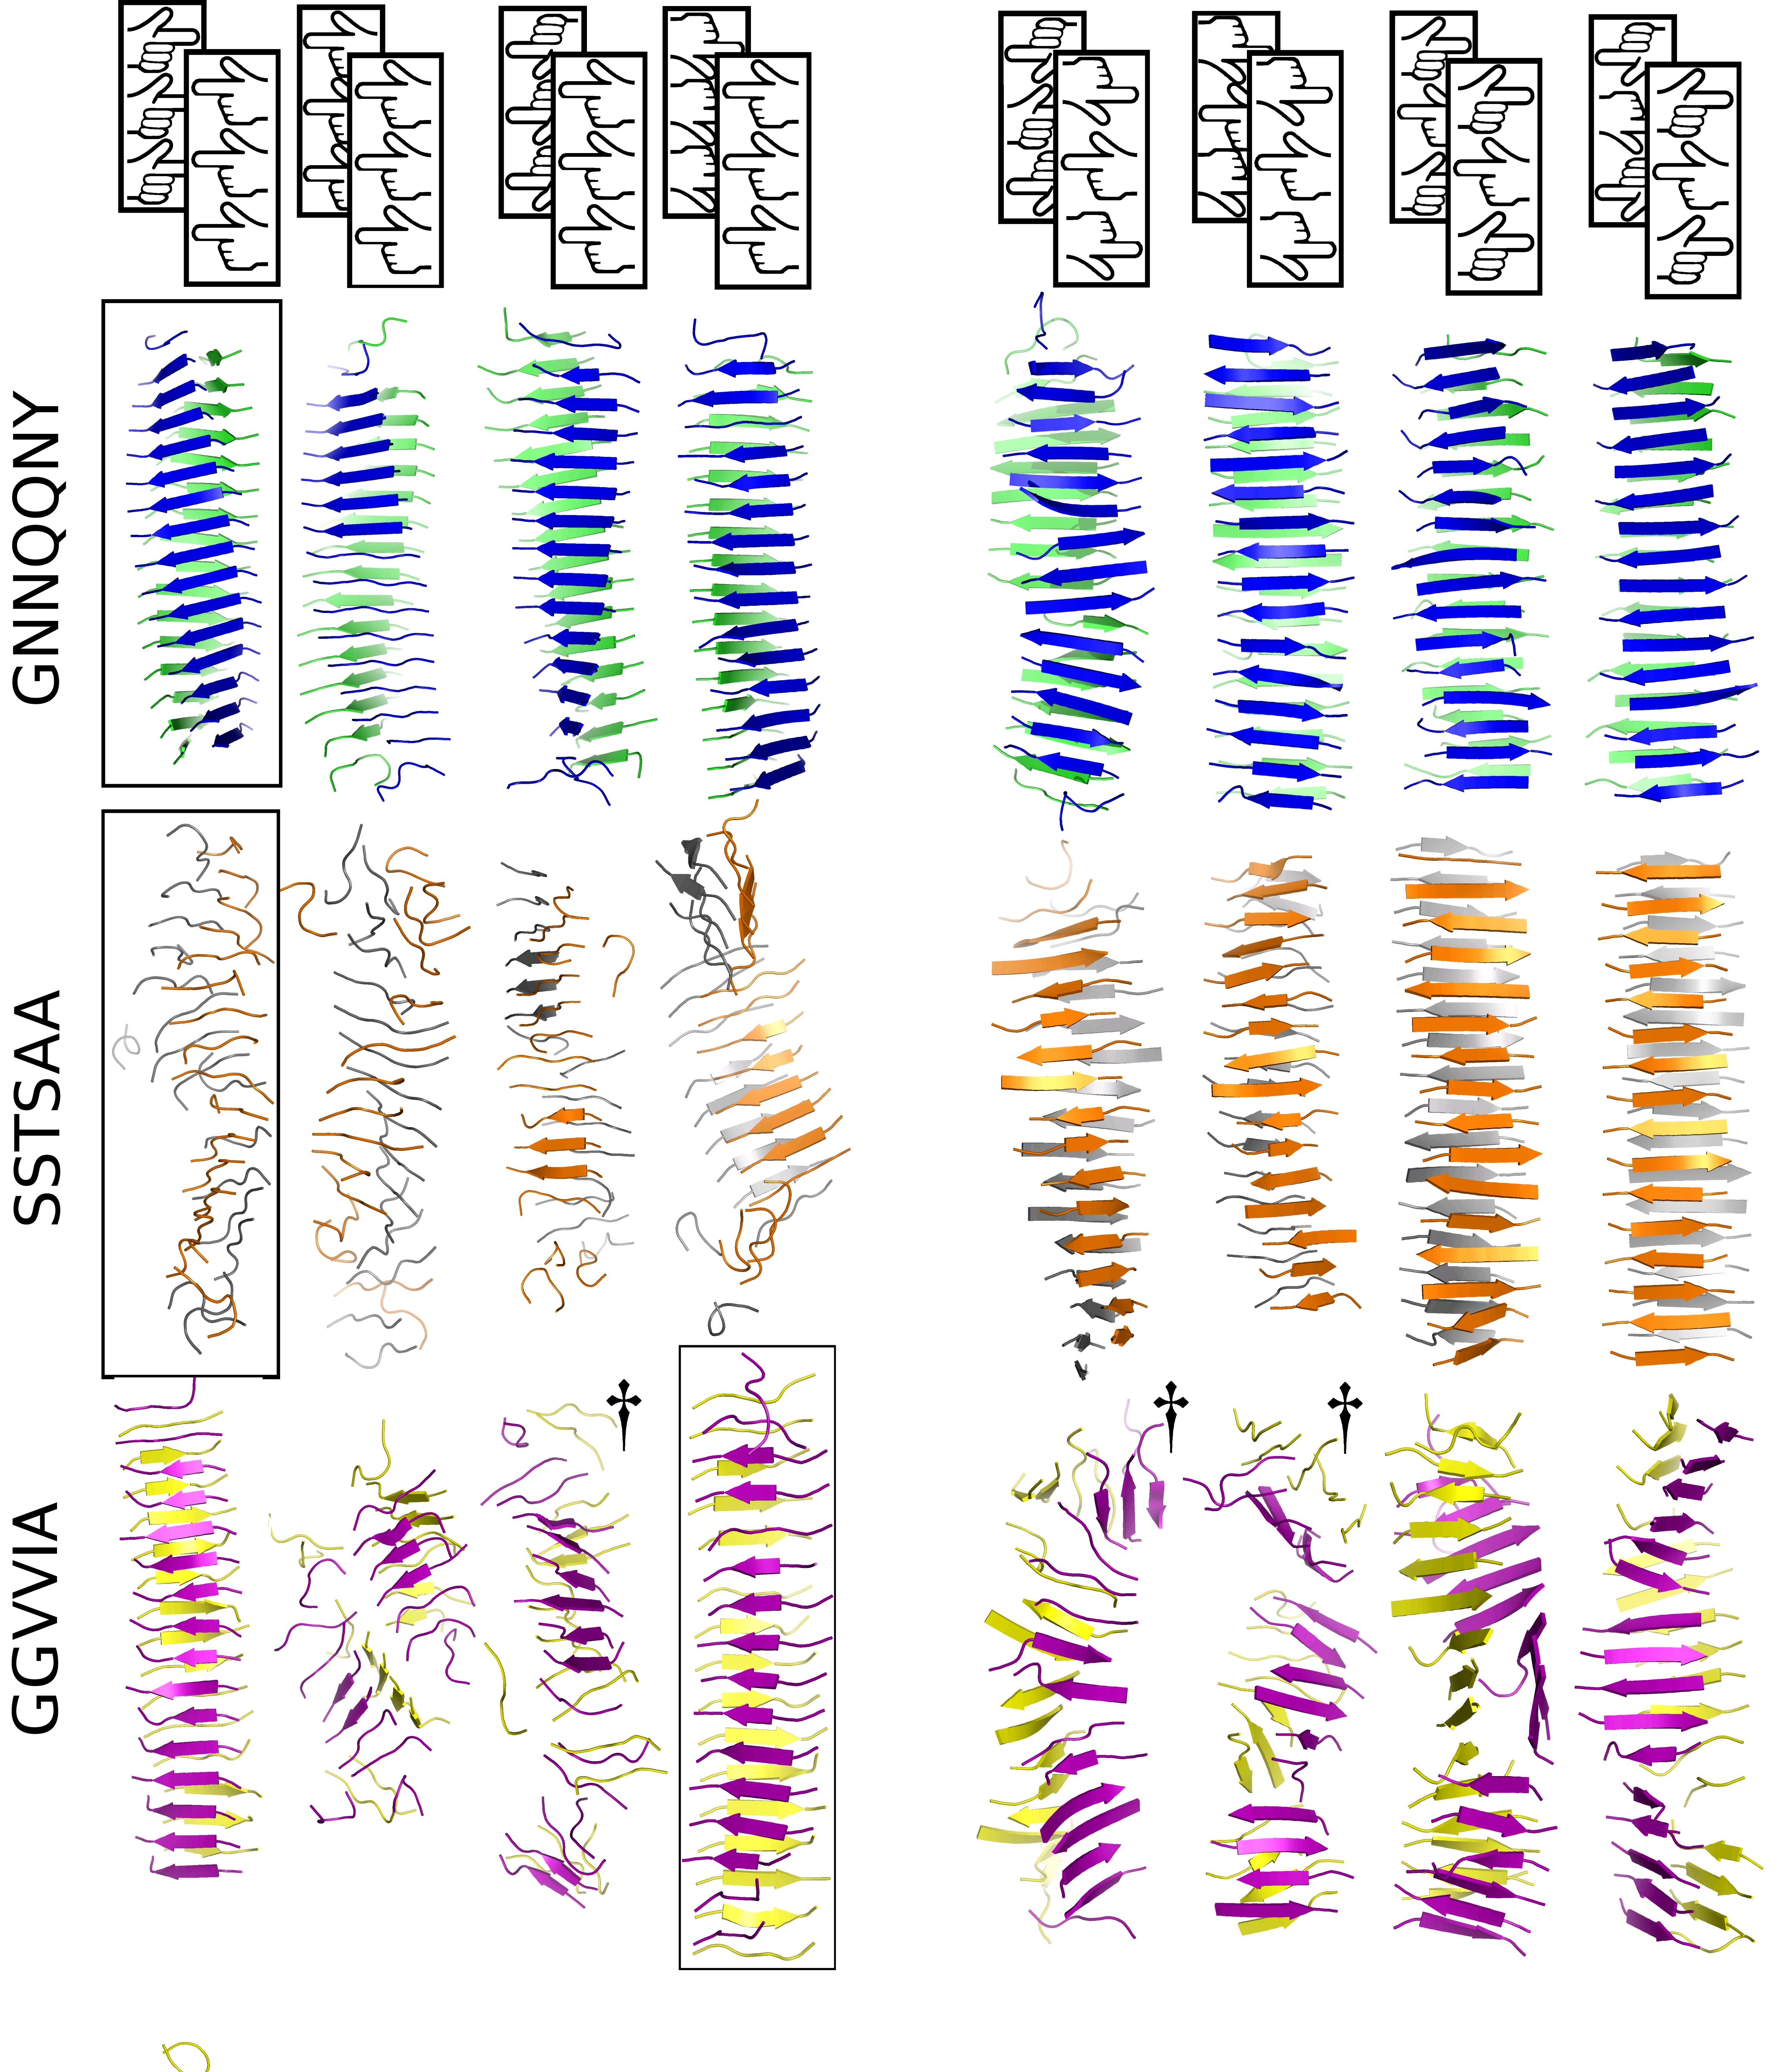 symmetry effects in amyloid aggregation